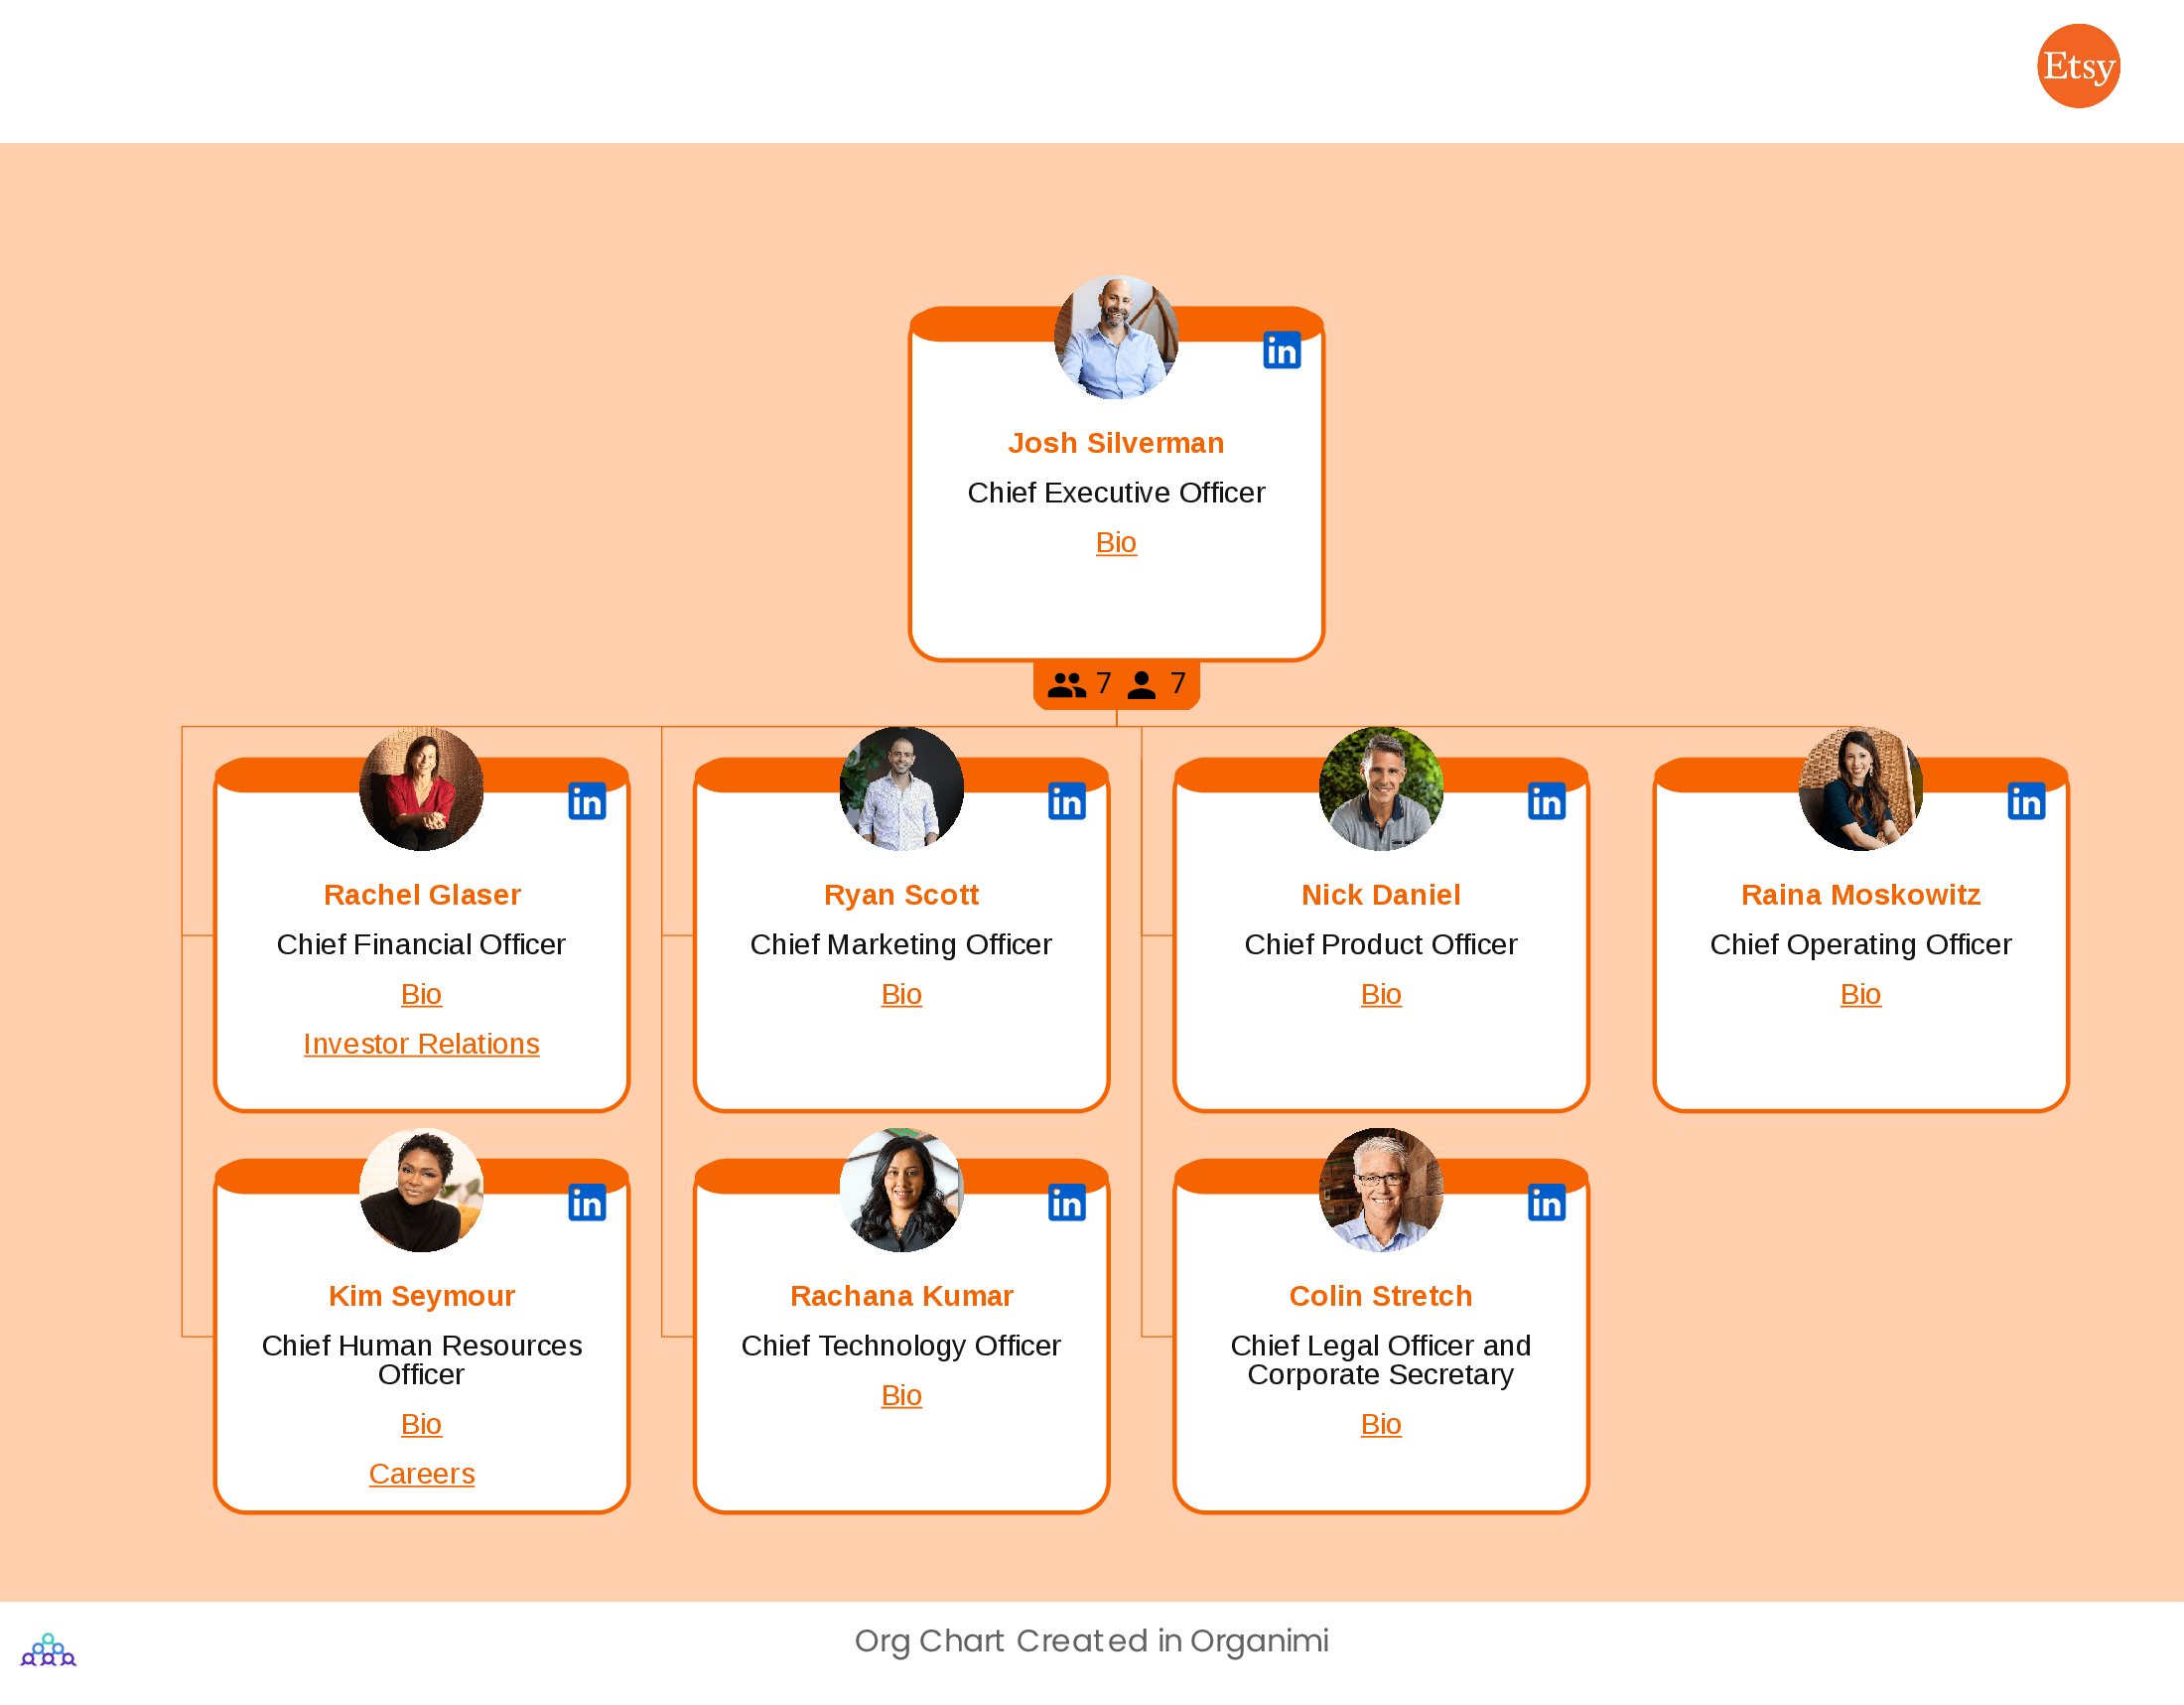 Etsy's Organizational Structure Chart